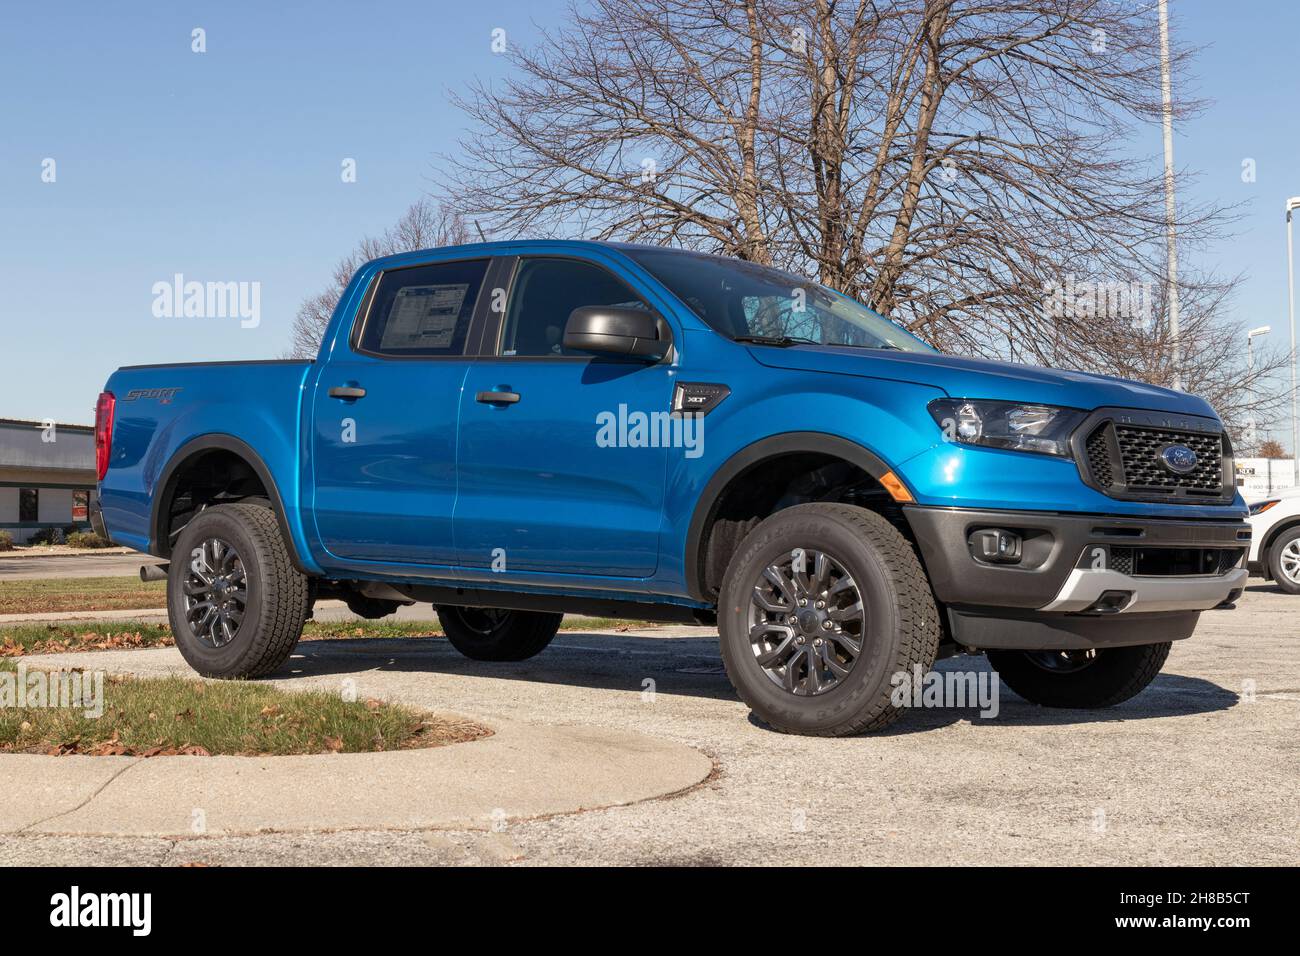 Fishers - Circa November 2021: Ford Ranger pickup truck display at a dealership. The Ranger nameplate has been used on multiple light duty trucks mode Stock Photo